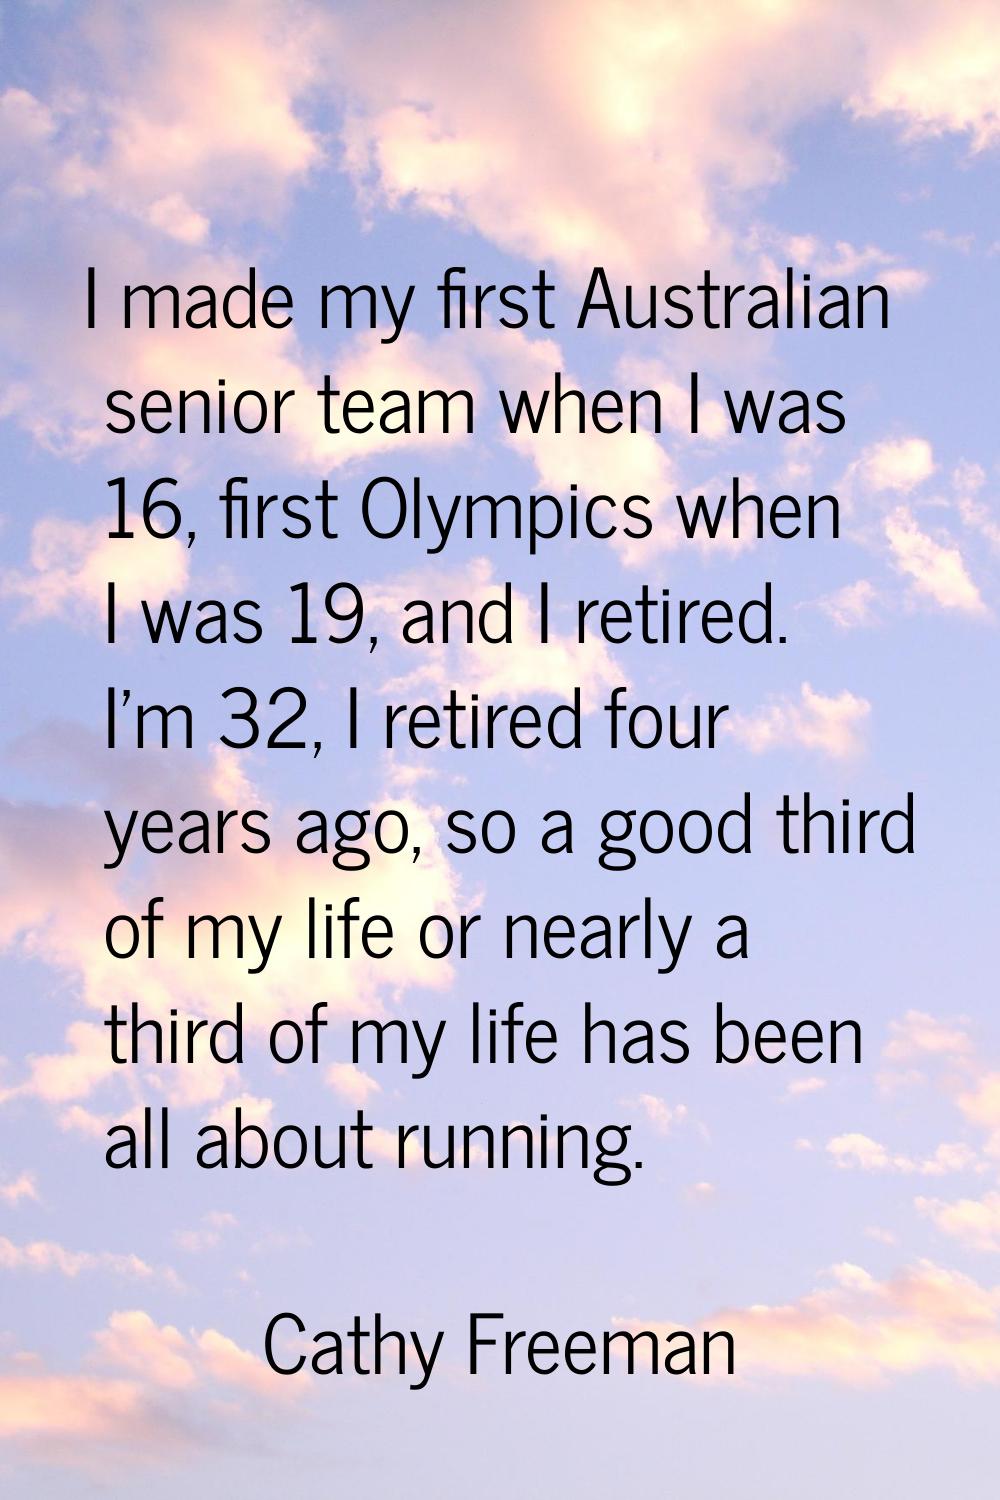 I made my first Australian senior team when I was 16, first Olympics when I was 19, and I retired. 